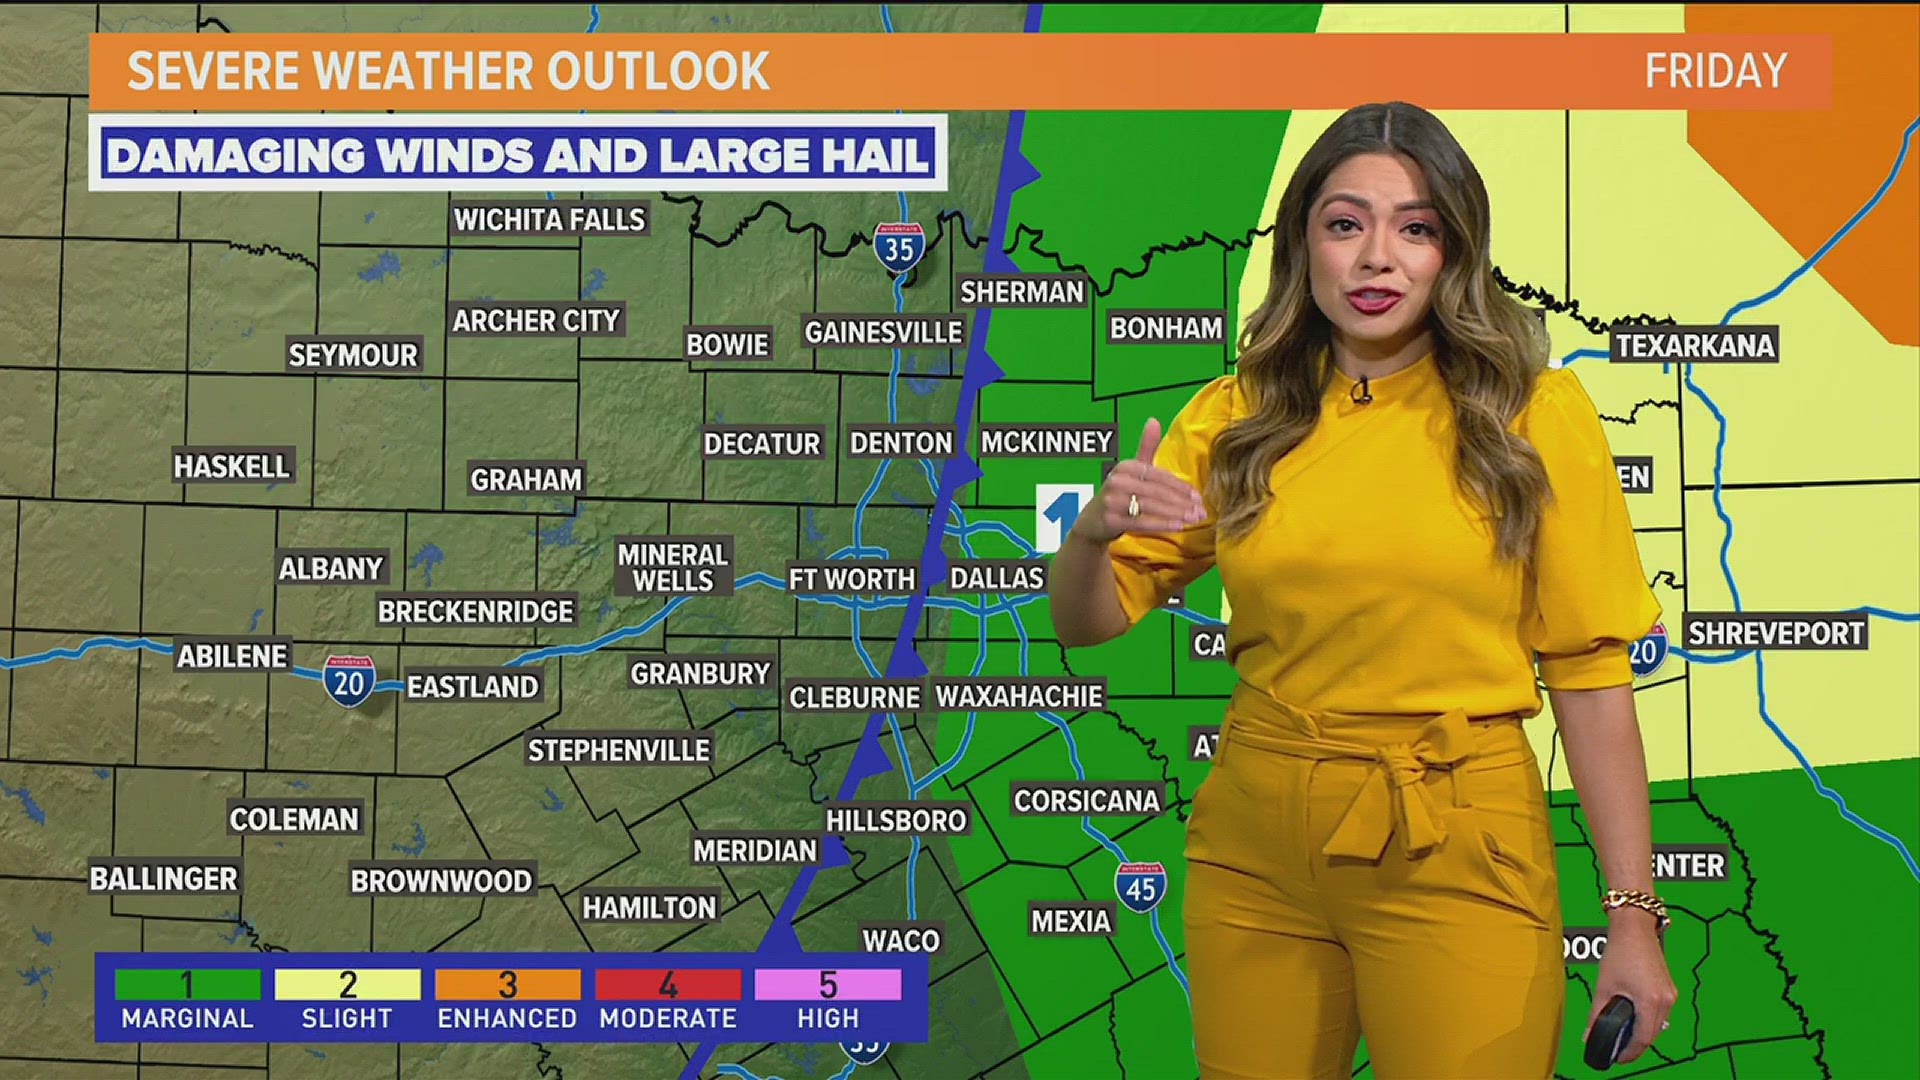 DFW Weather: Storms return to close out the week. Here is the latest timeline with Meteorologist Mariel Ruiz